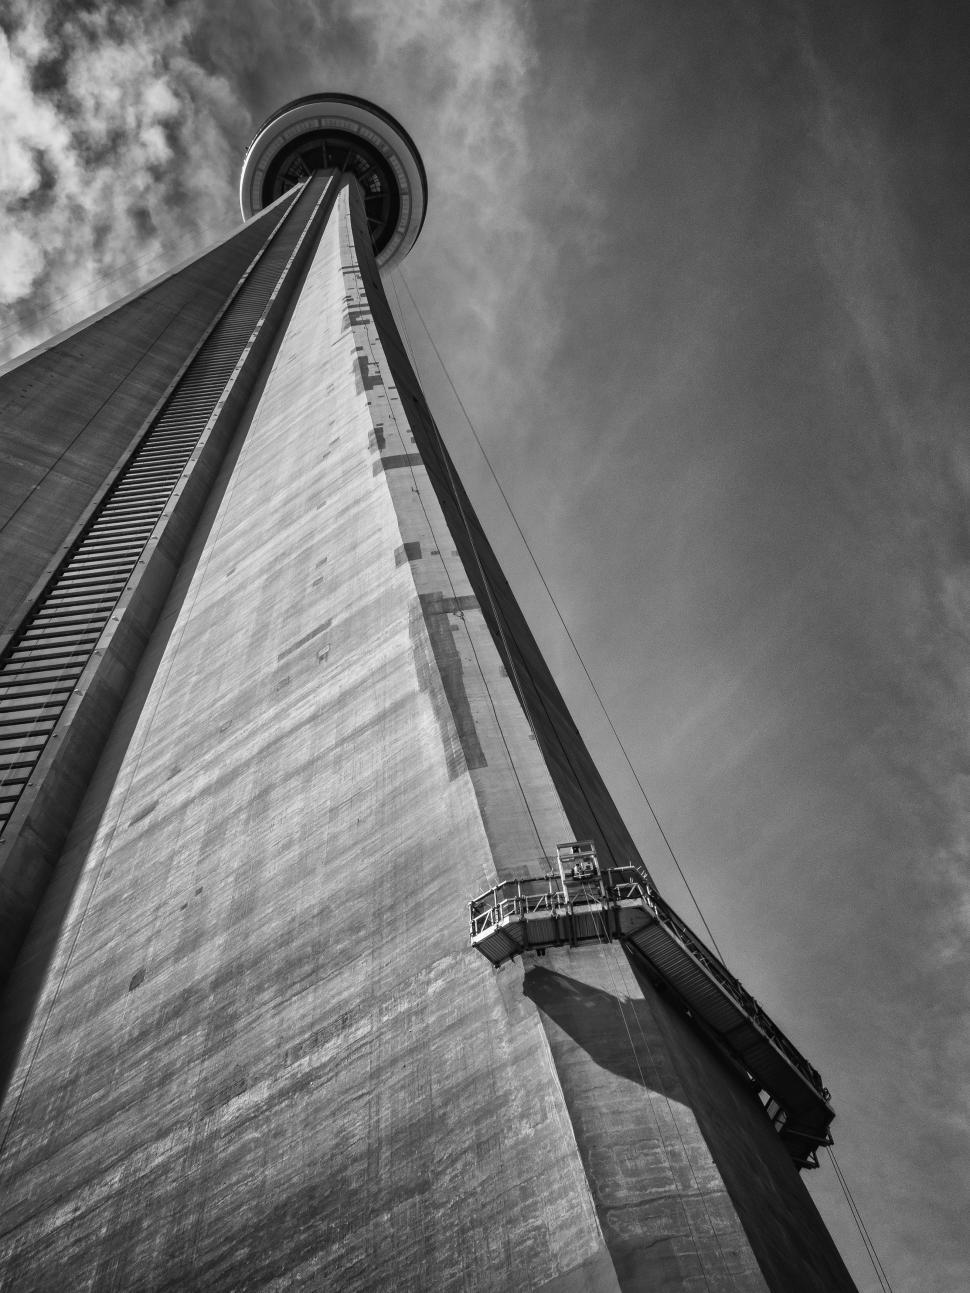 Free Image of Top of a Tall Building in Black and White 